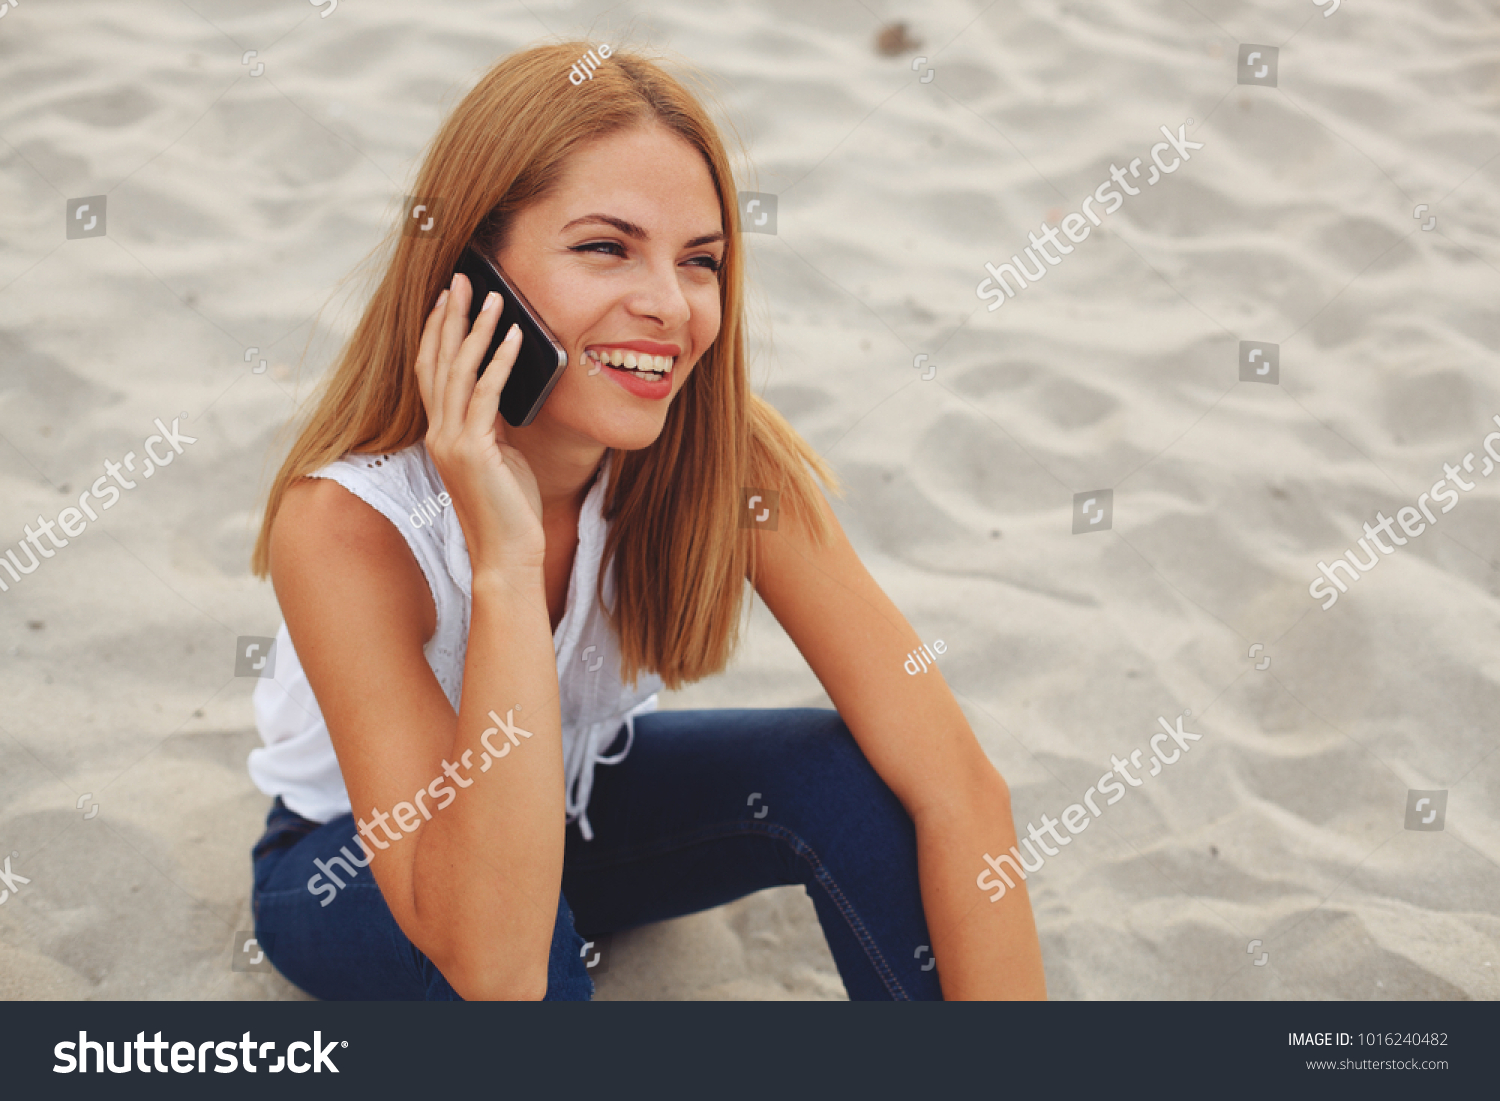 Young happy woman sitting on the beach sand and talking on the phone #1016240482